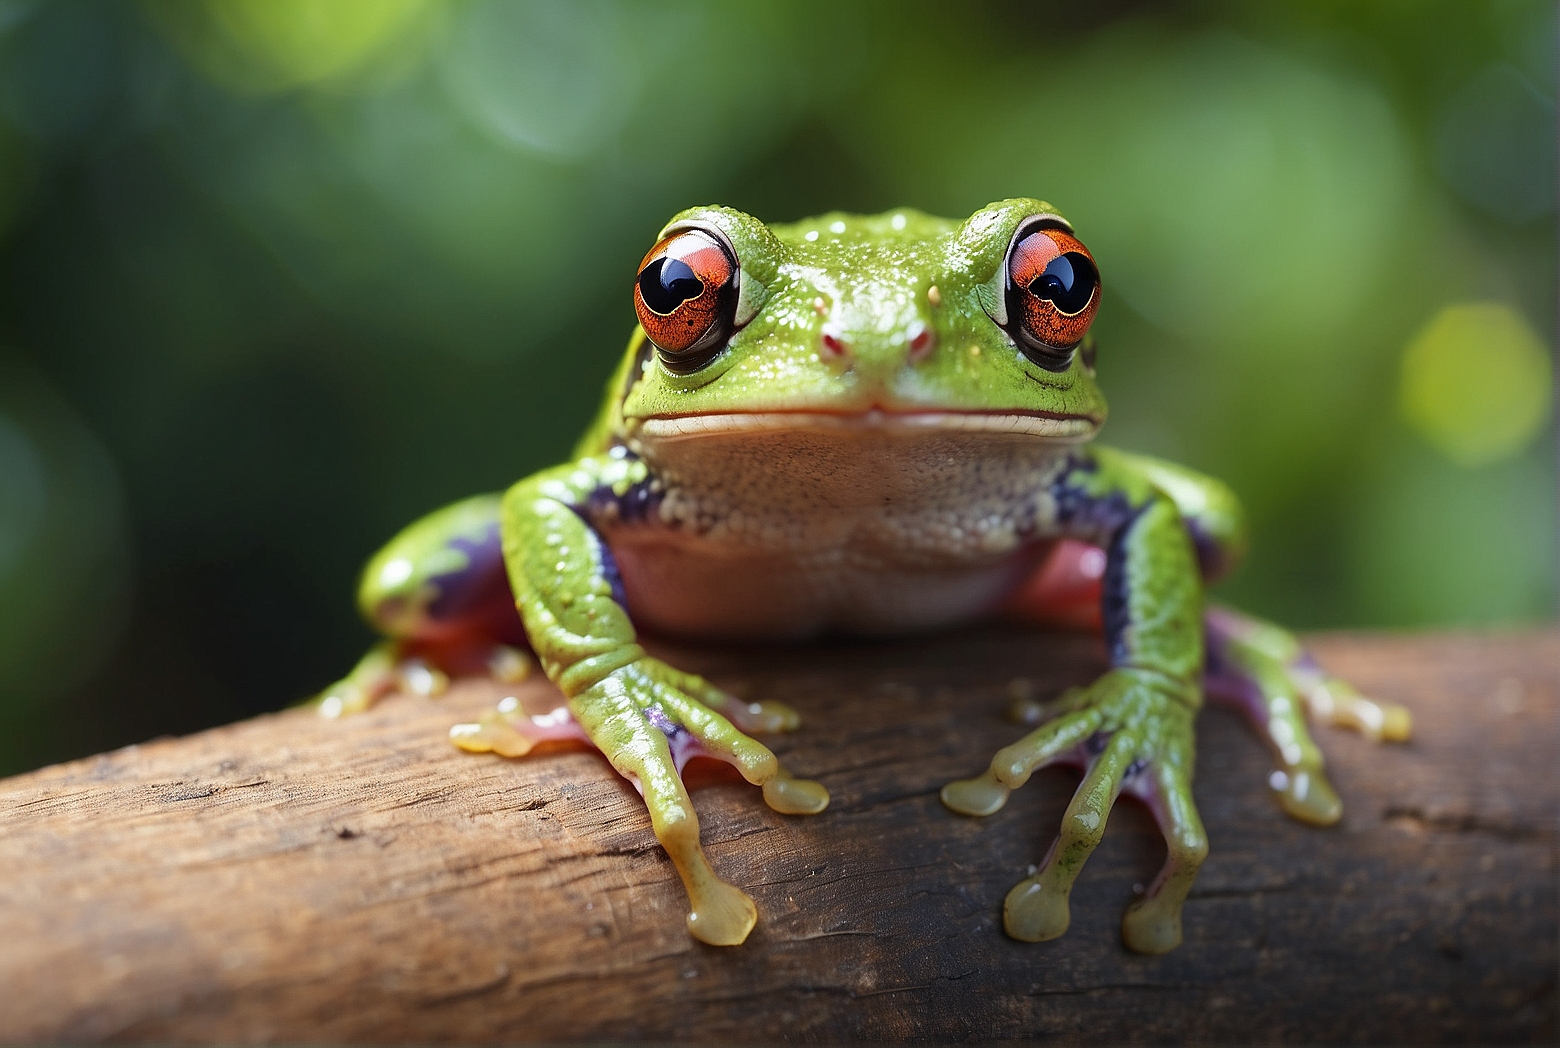 The Ultimate Guide on How to Take Care of Tree Frogs